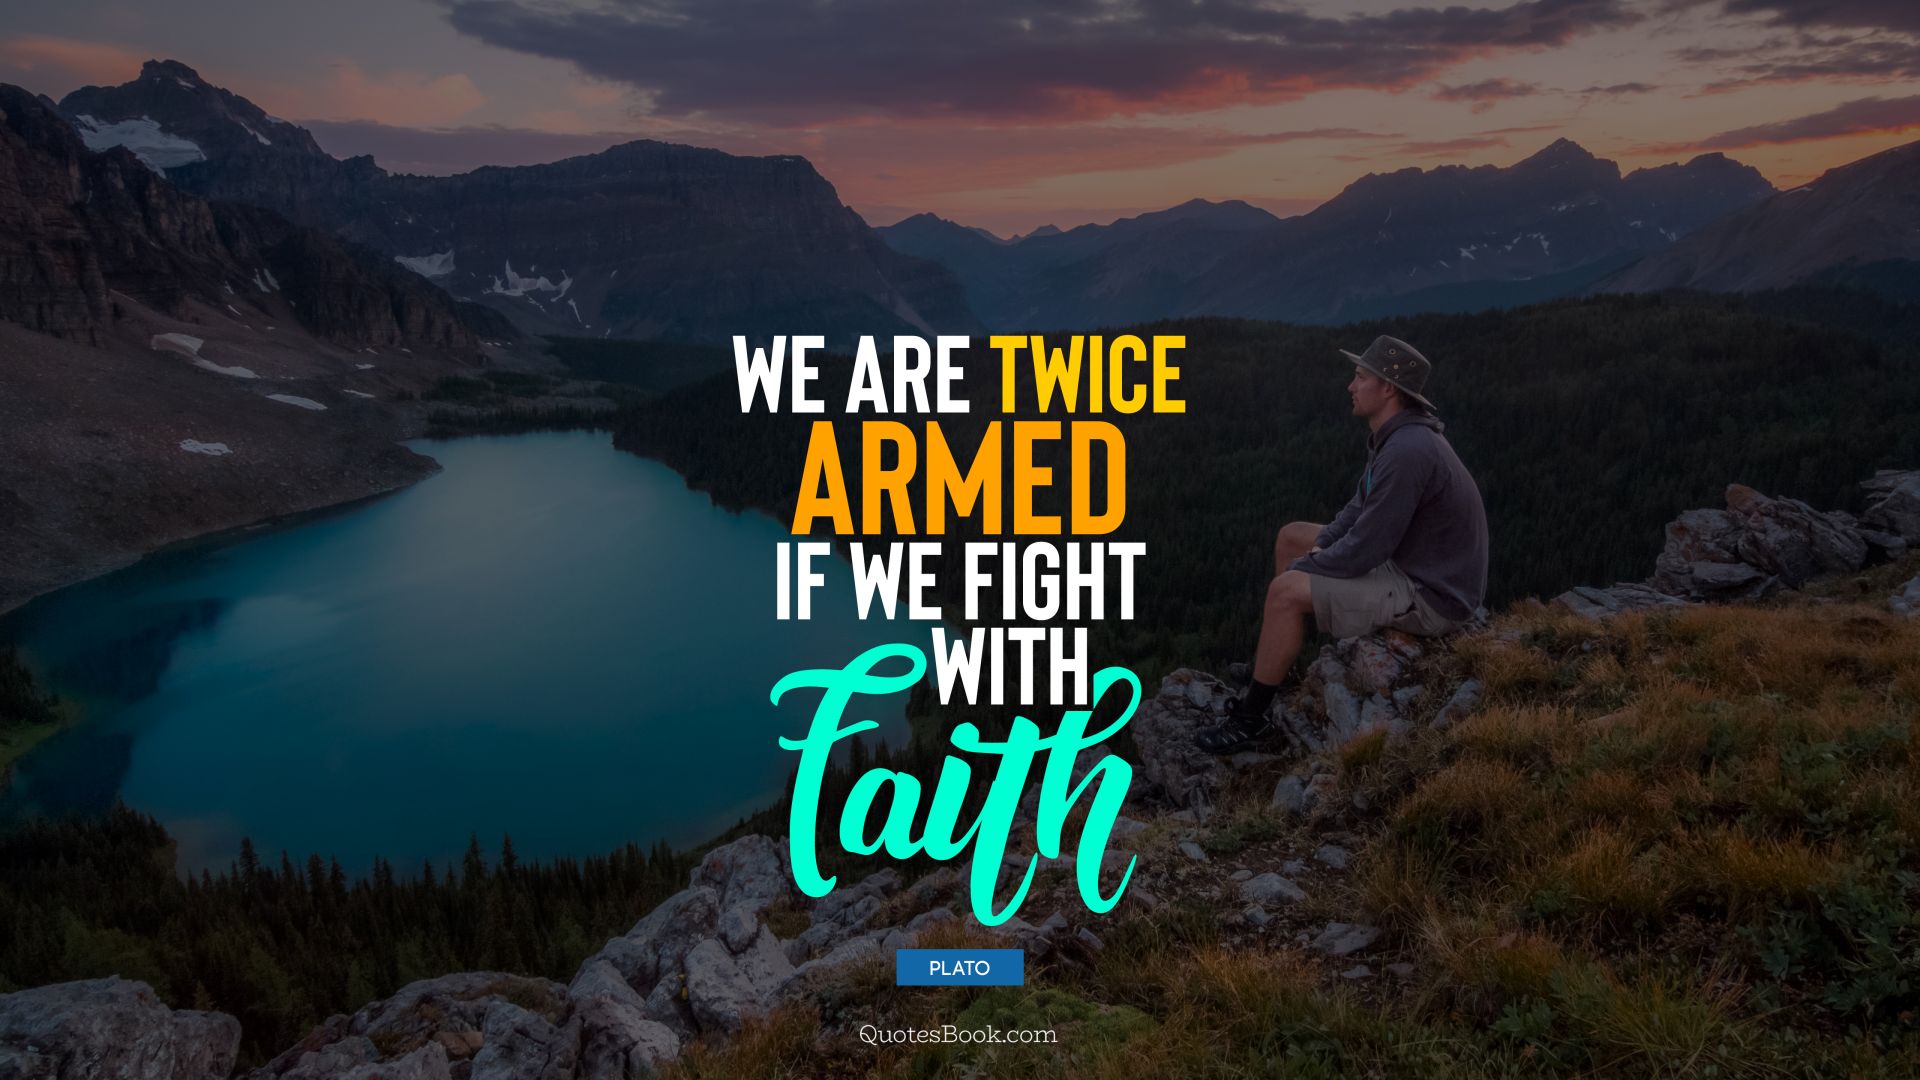 We are twice armed if we fight with faith. - Quote by Plato